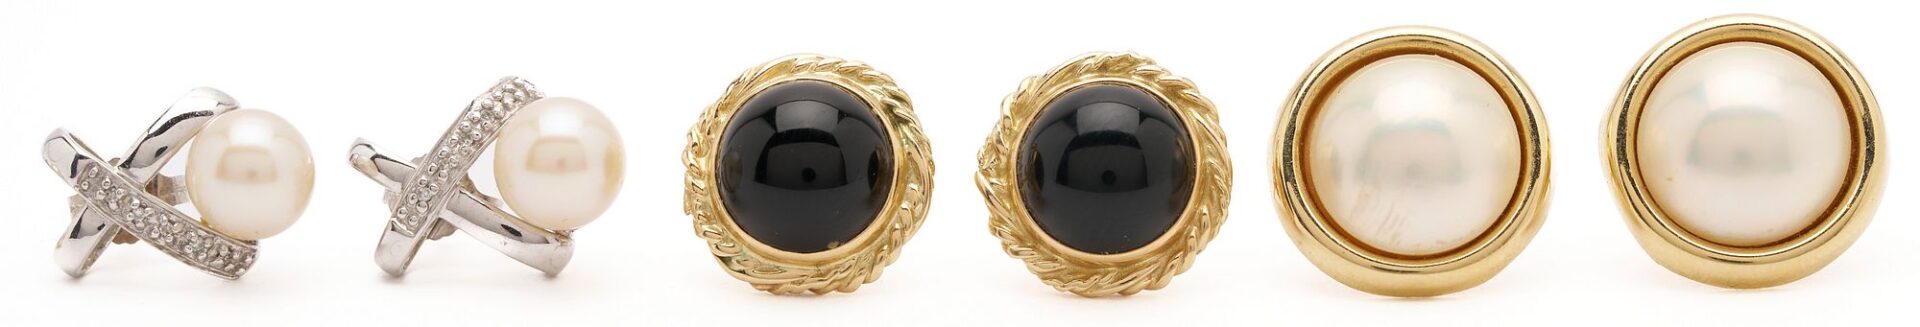 Lot 862: Five (5) Pairs of Gold, Pearl, & Onyx Earrings